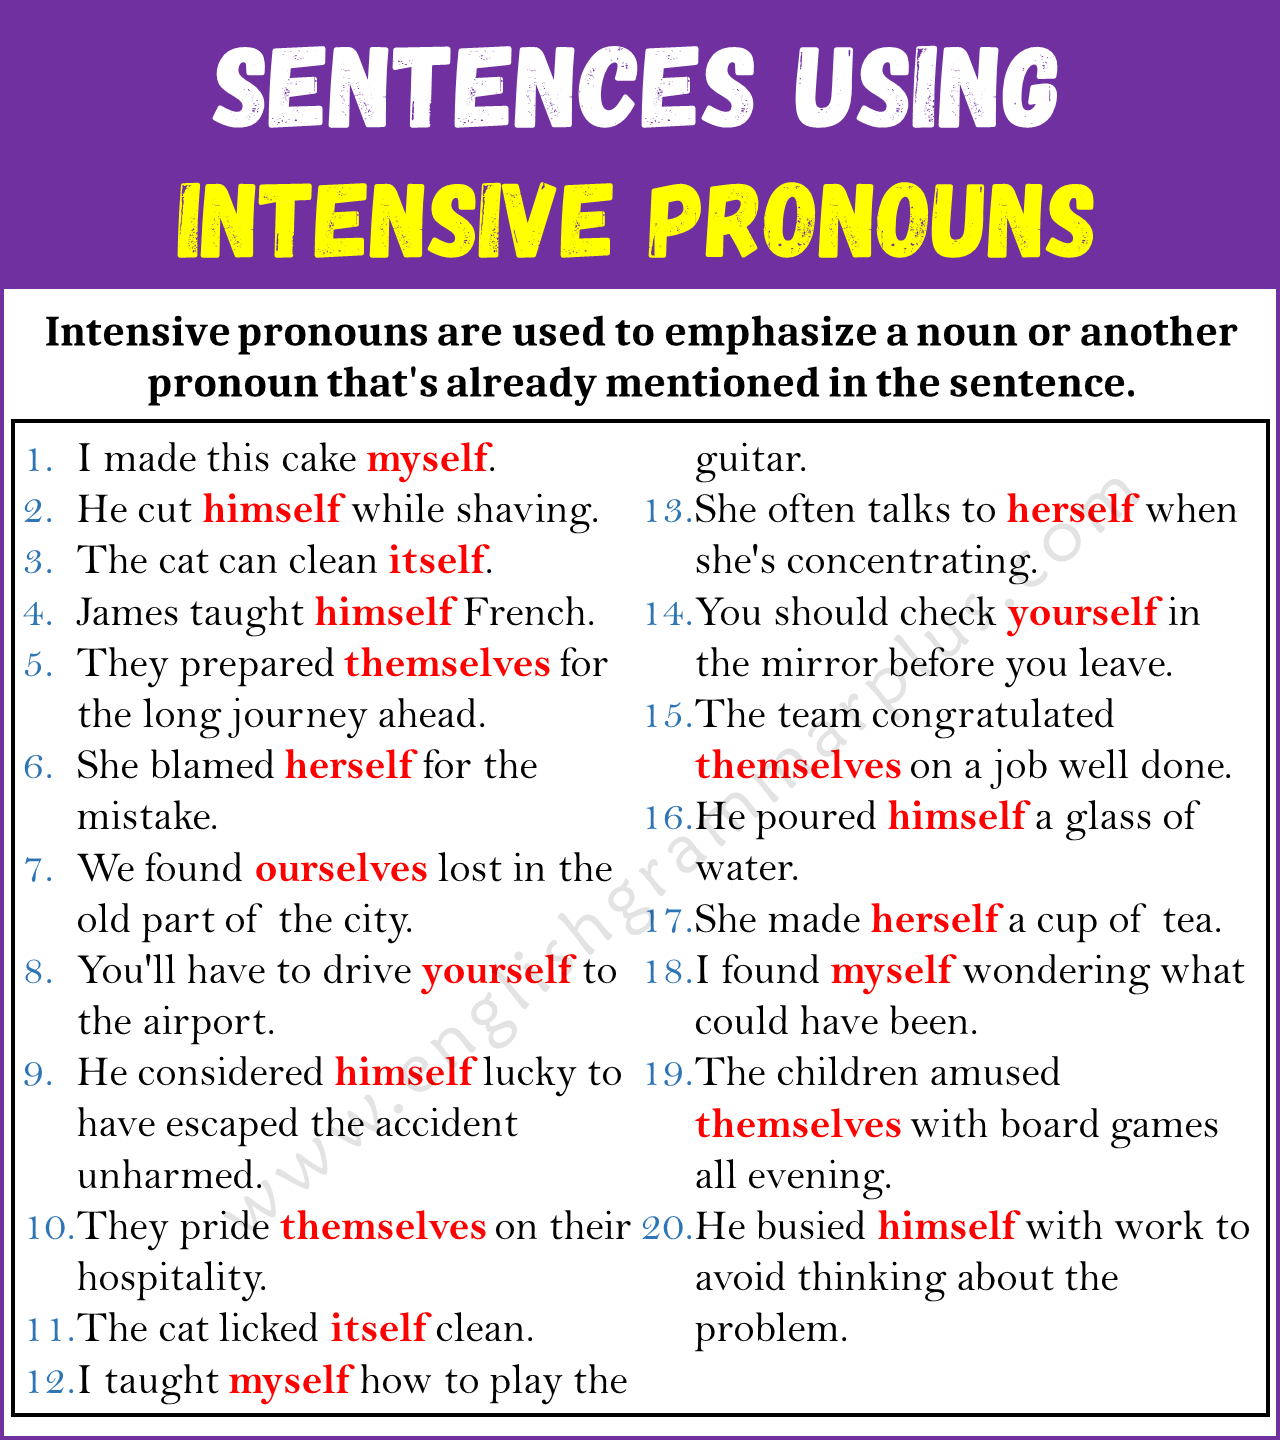 Examples of Intensive Pronouns in Sentences